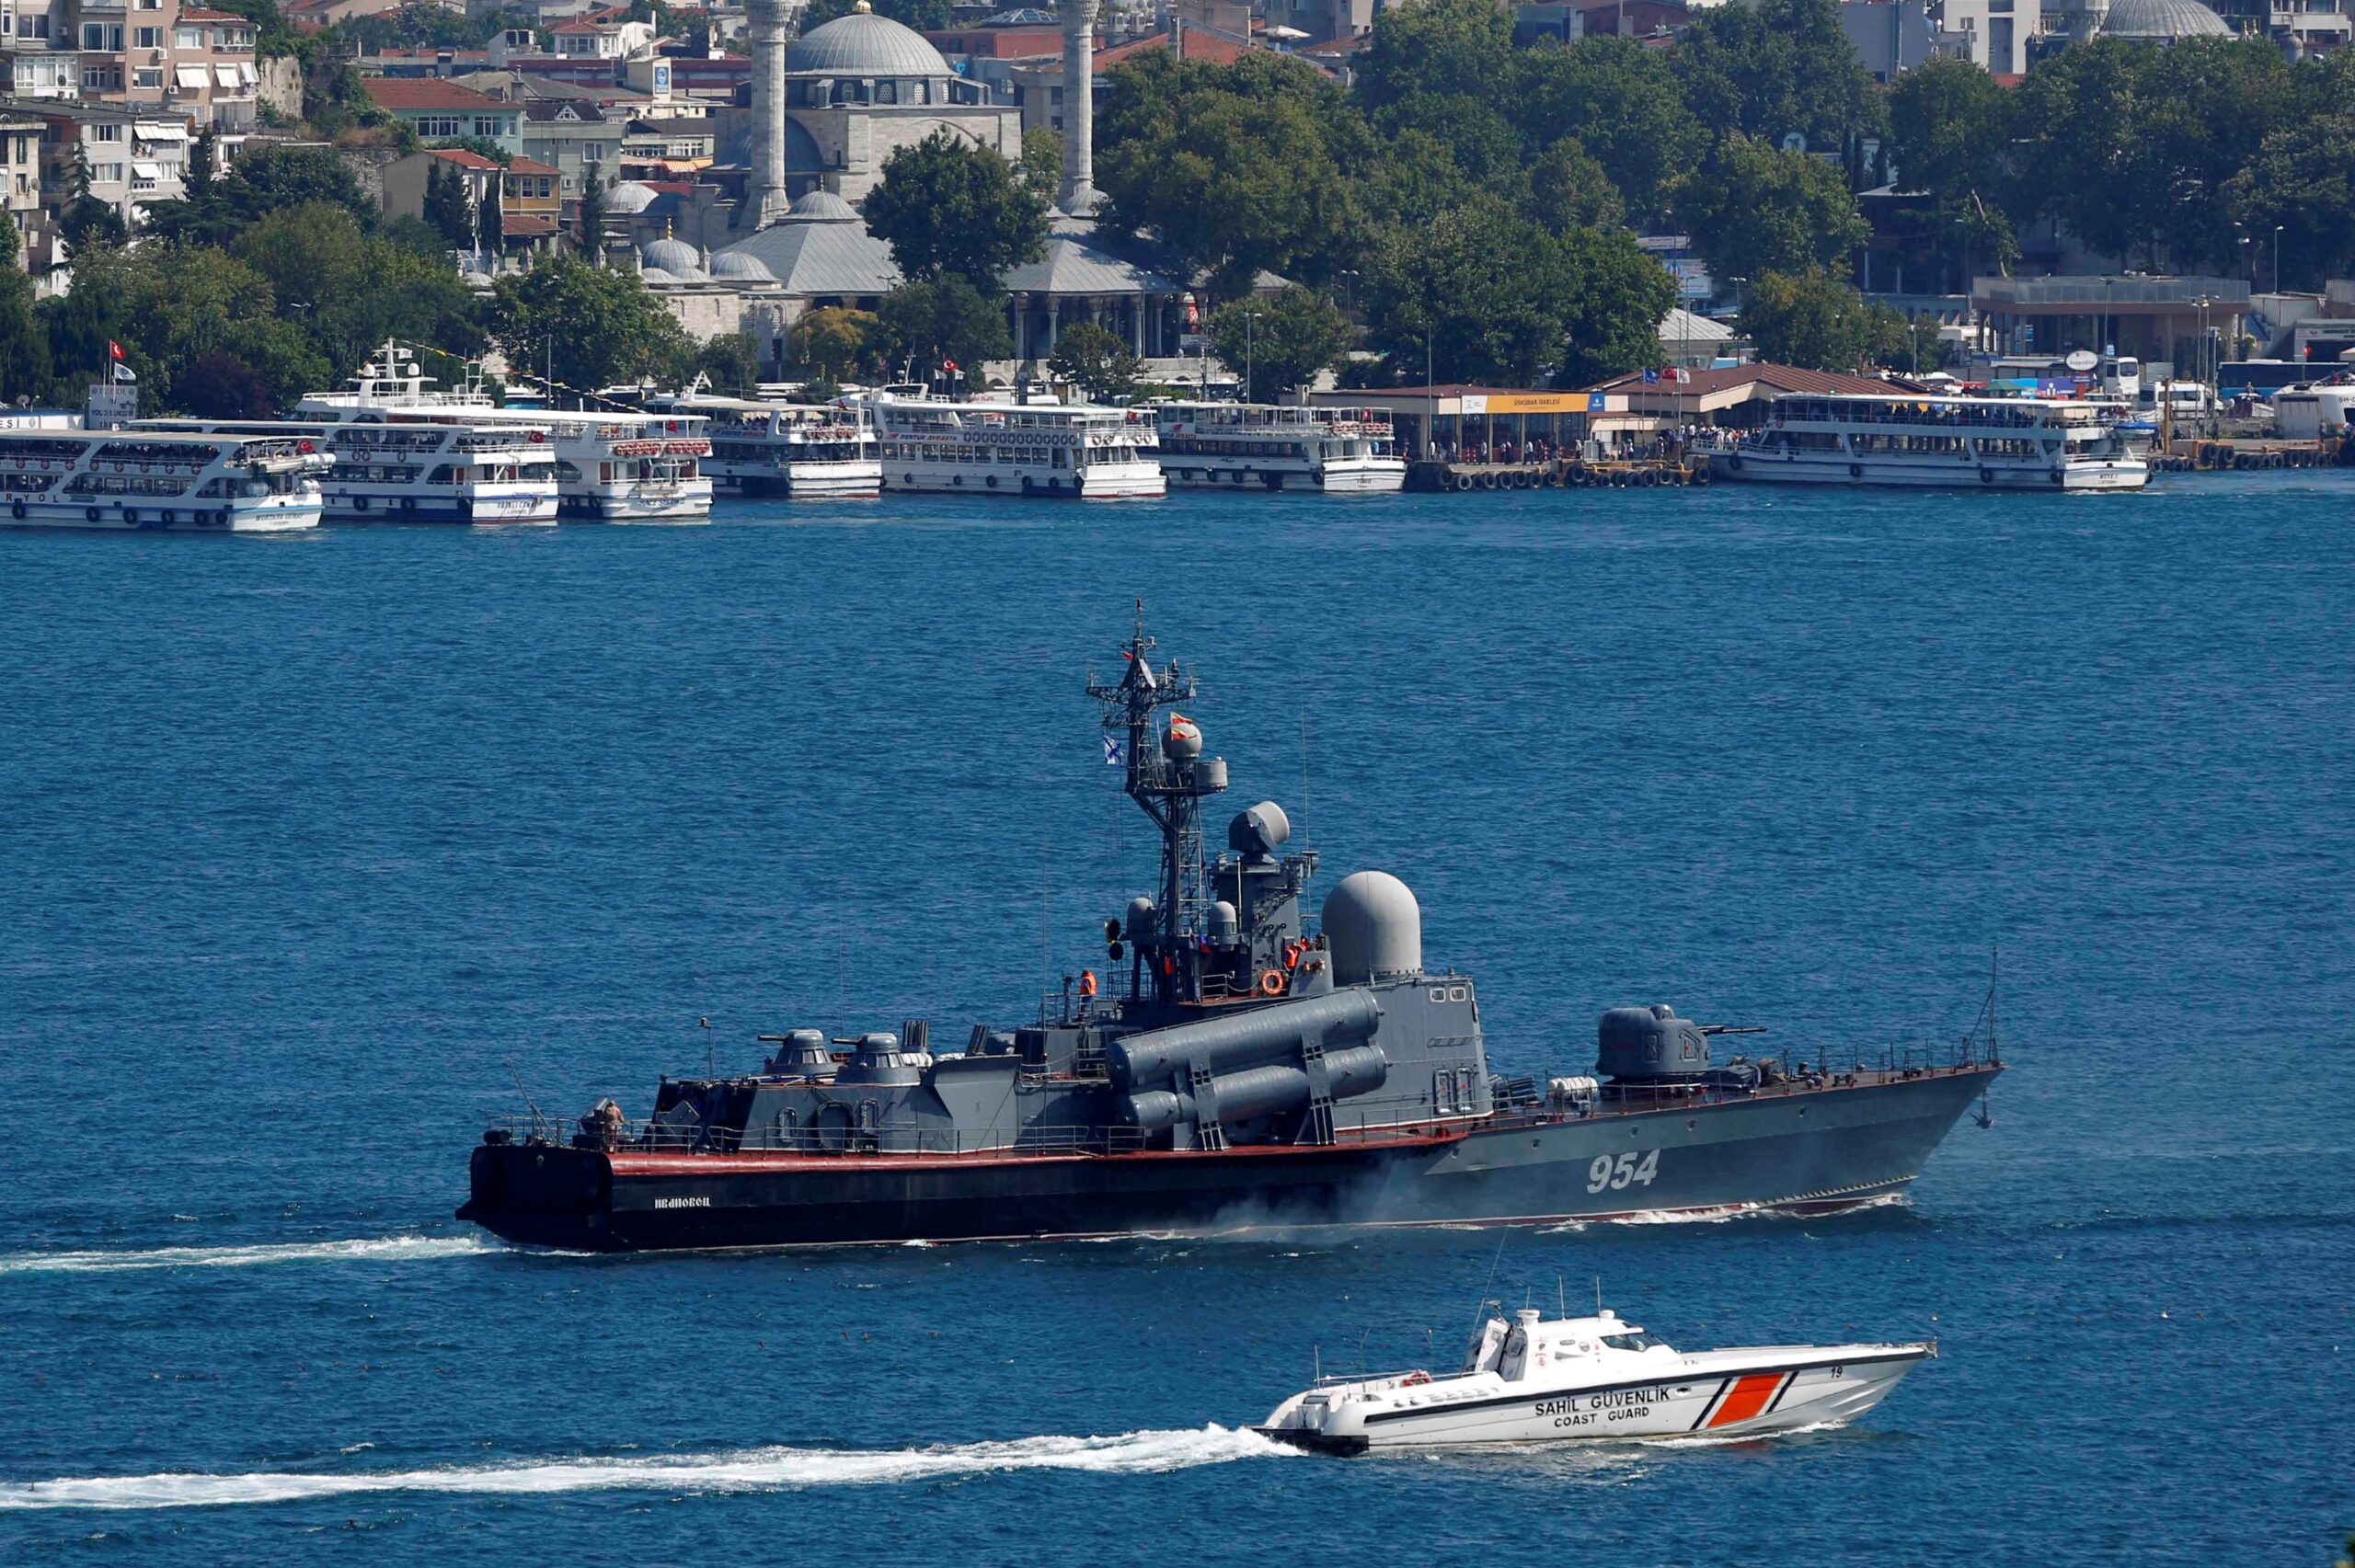 A Russian navy warship is escorted by a smaller Turkish navy boat